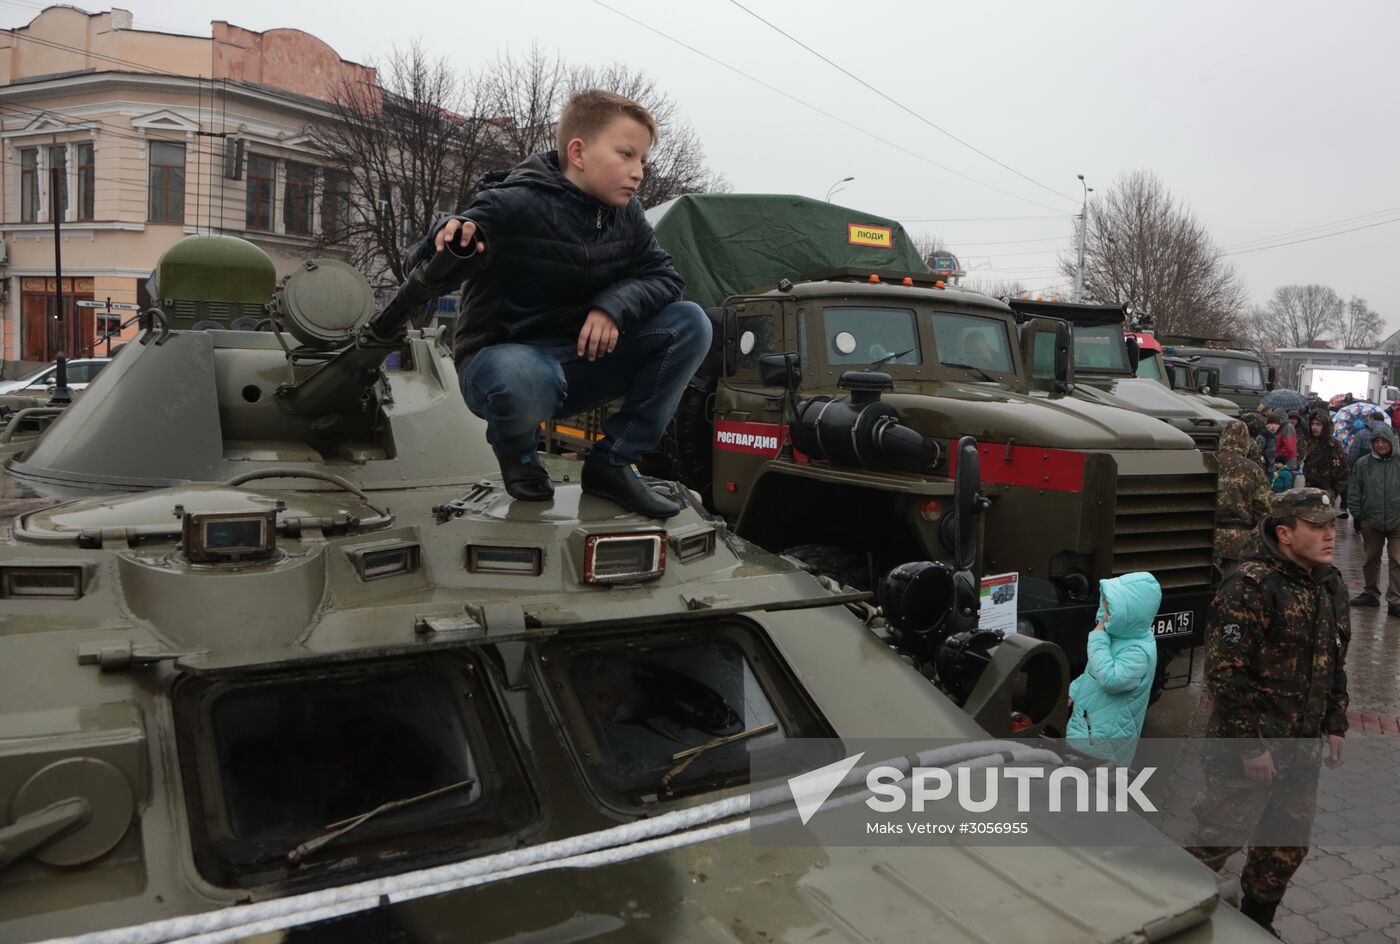 Simferopol events marking one year anniversary of Russian National Guard